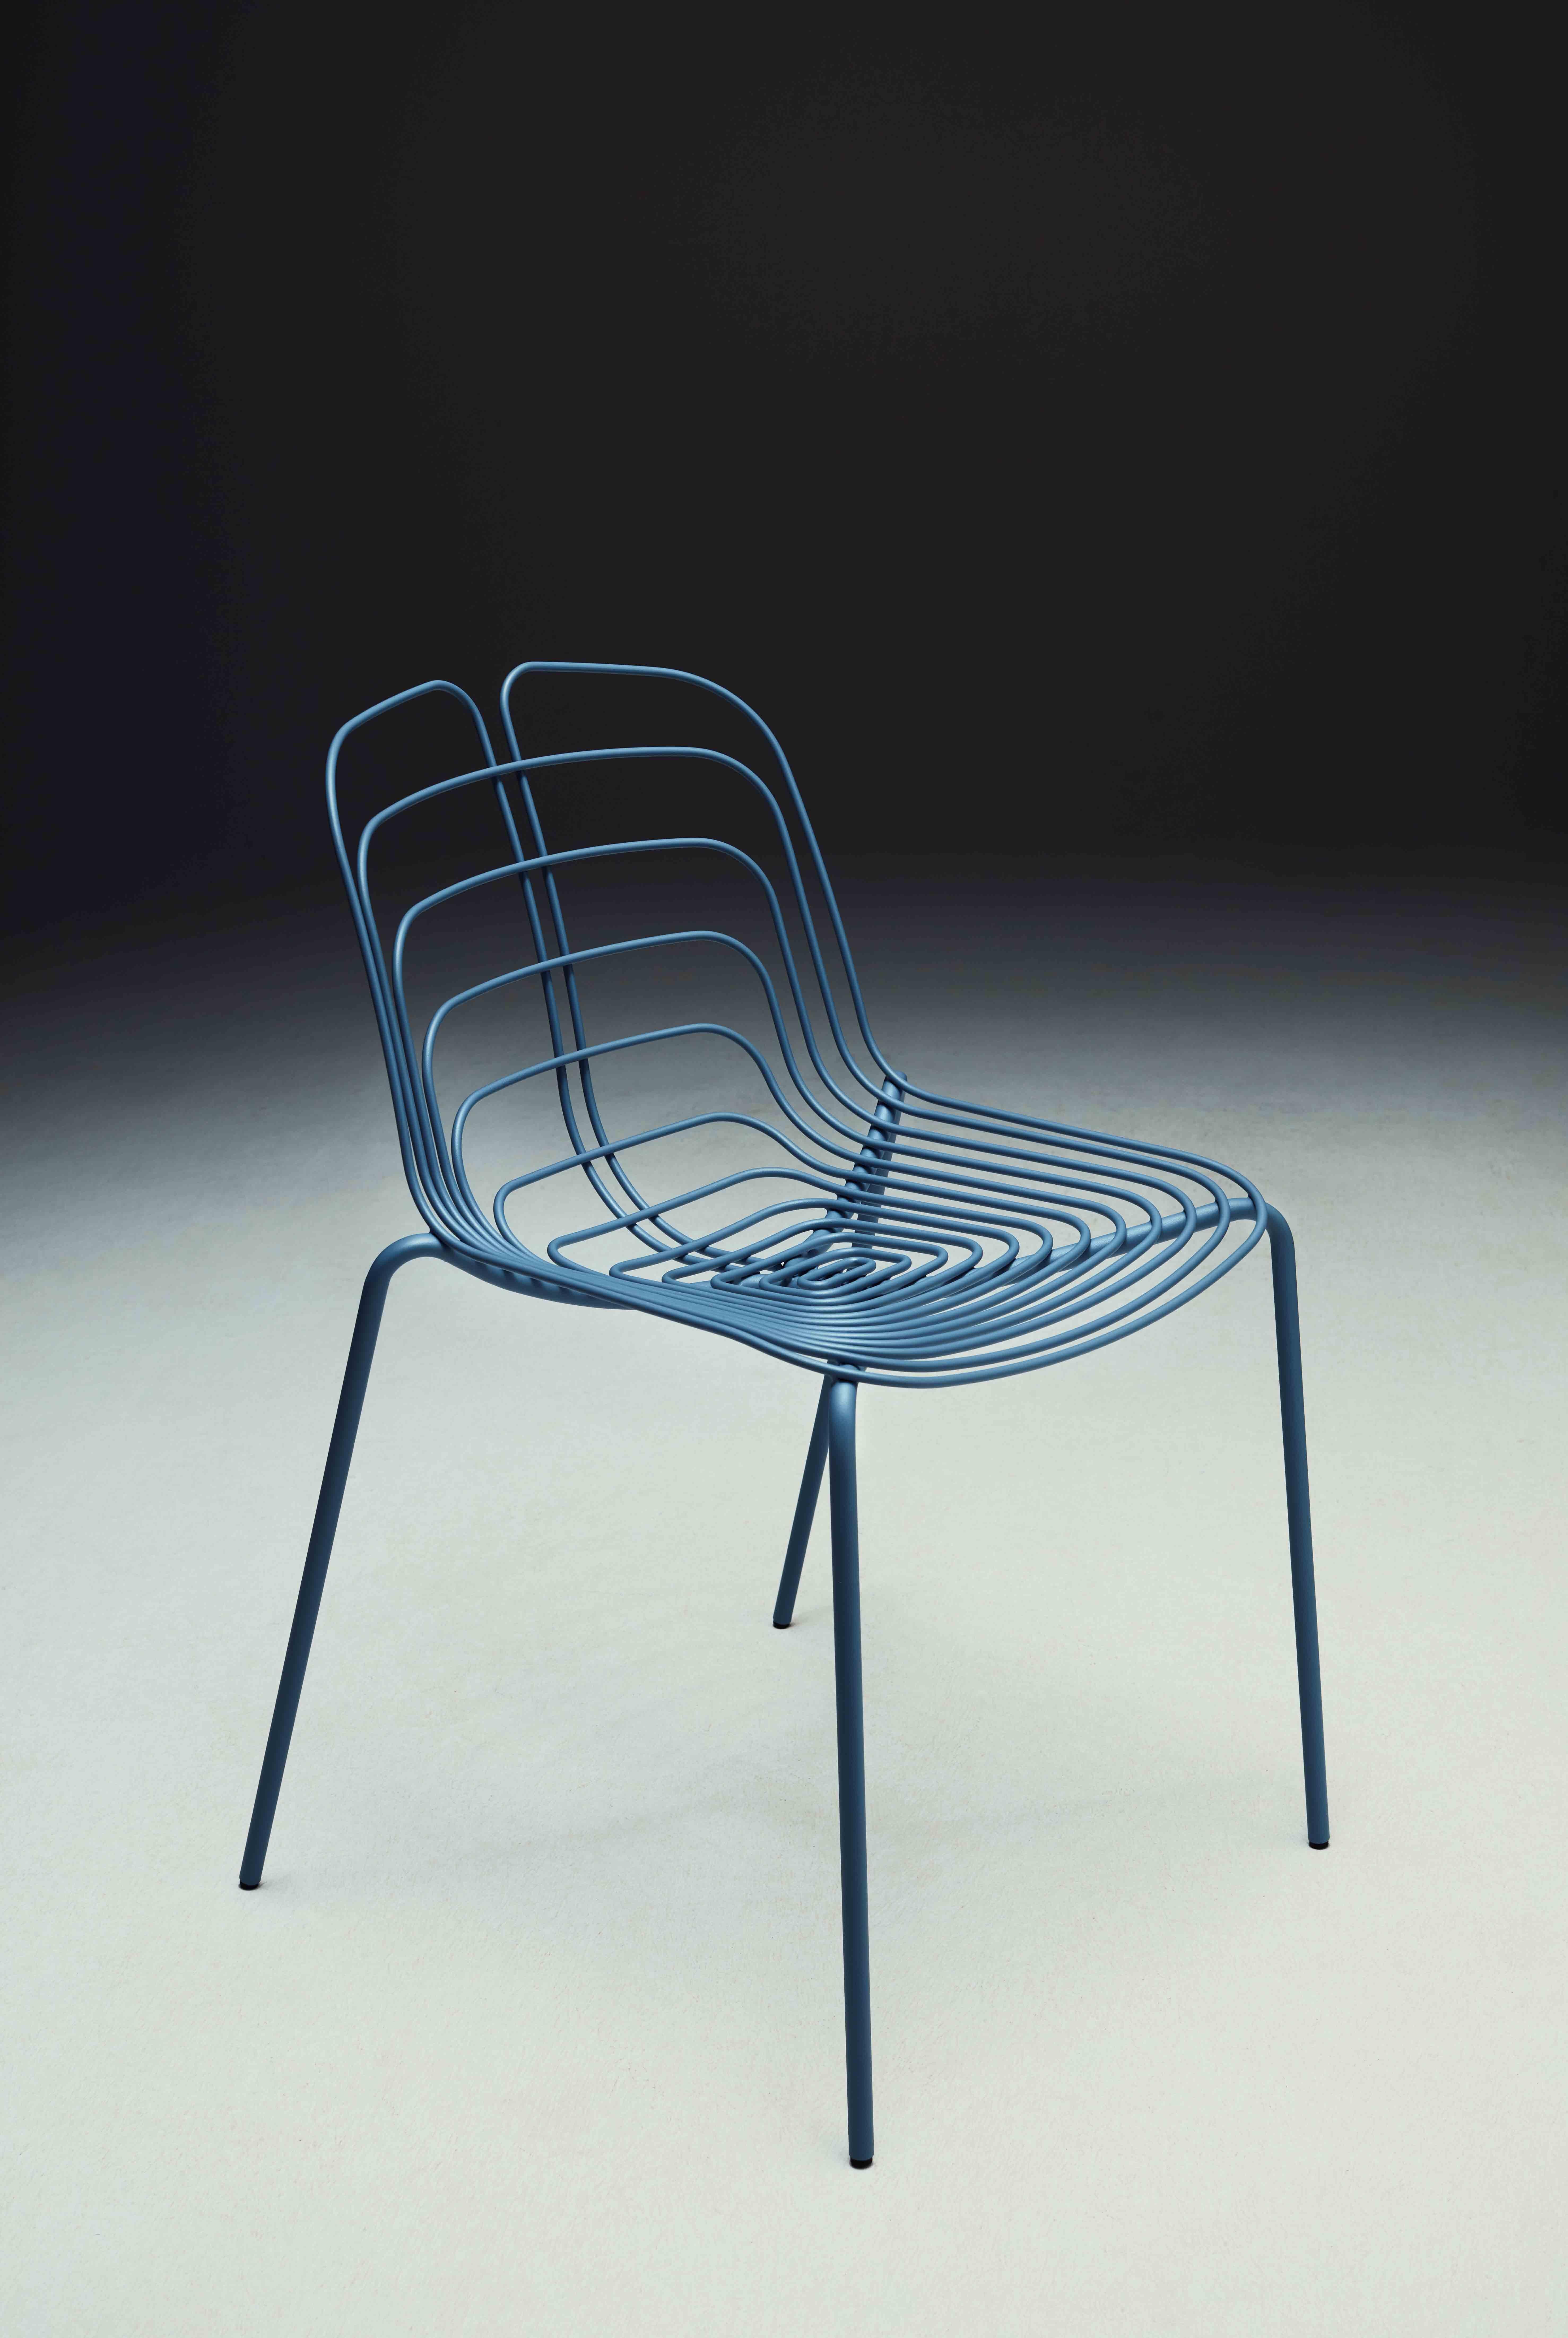 Wired outdoor chair by Michael Young
Dimensions: W 50 x D 51.7 x H 77.5 cm
Materials: Powder Coated Metal structure

The Wired Chair by Michael Young is a proud tribute to Harry Bertoia’s iconic design. This updated take on a classic piece is